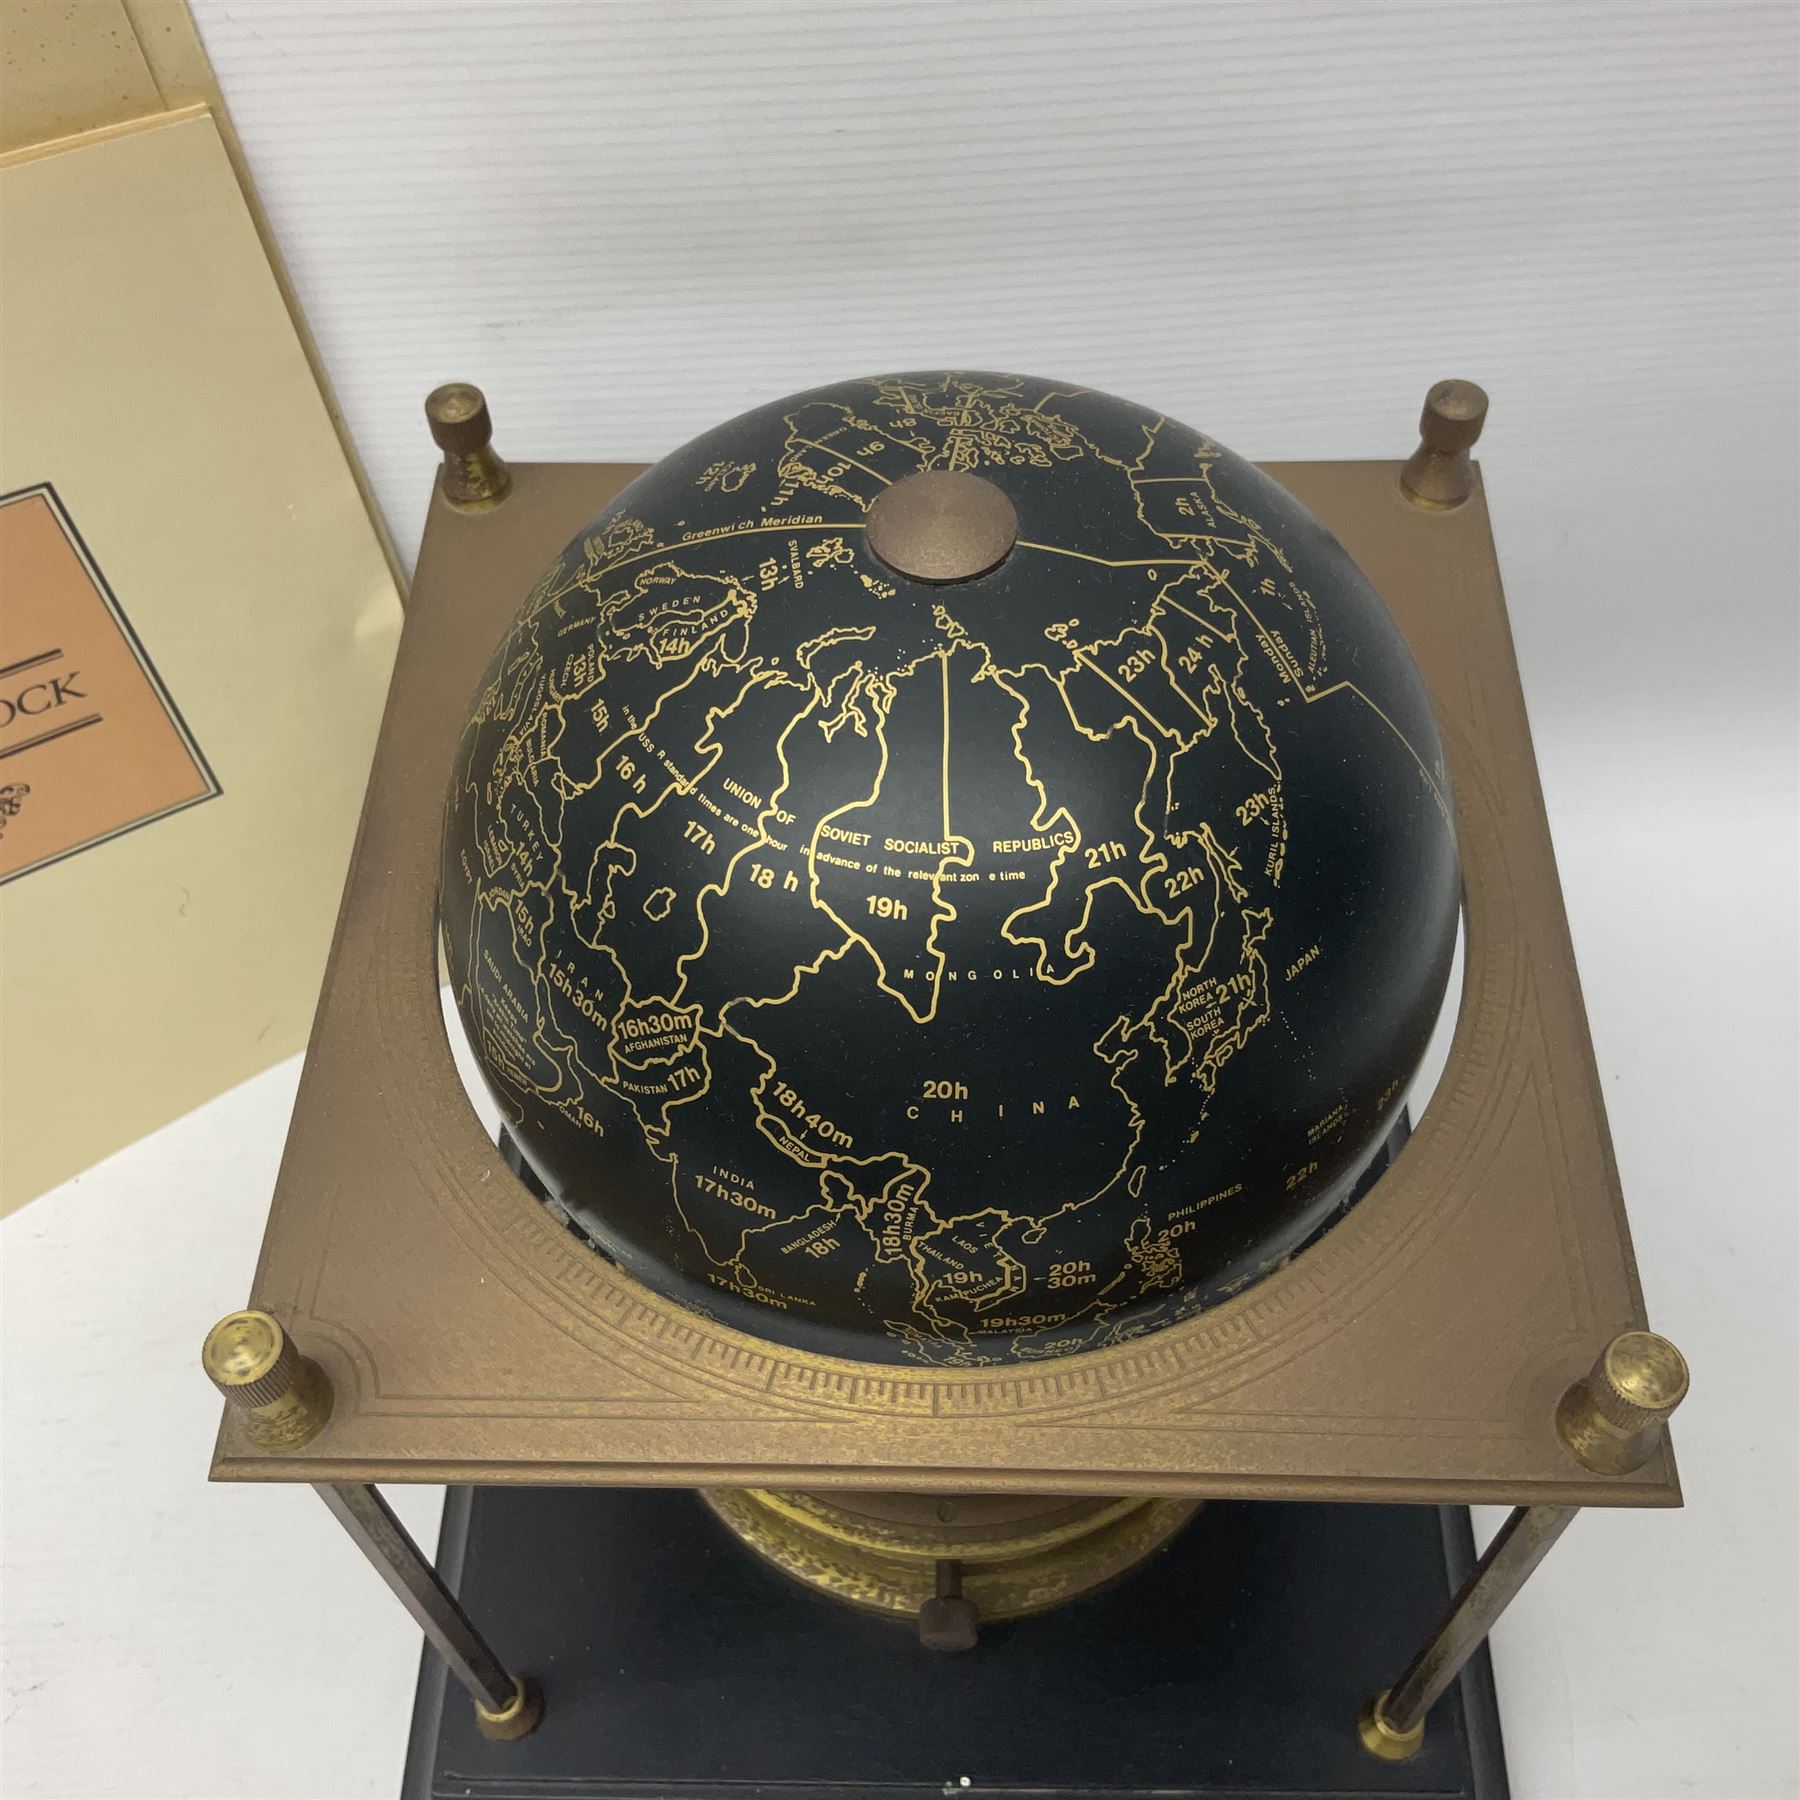 1980 Franklin Mint Royal Geographical Society World Clock with eight day movement indicating current - Image 6 of 11